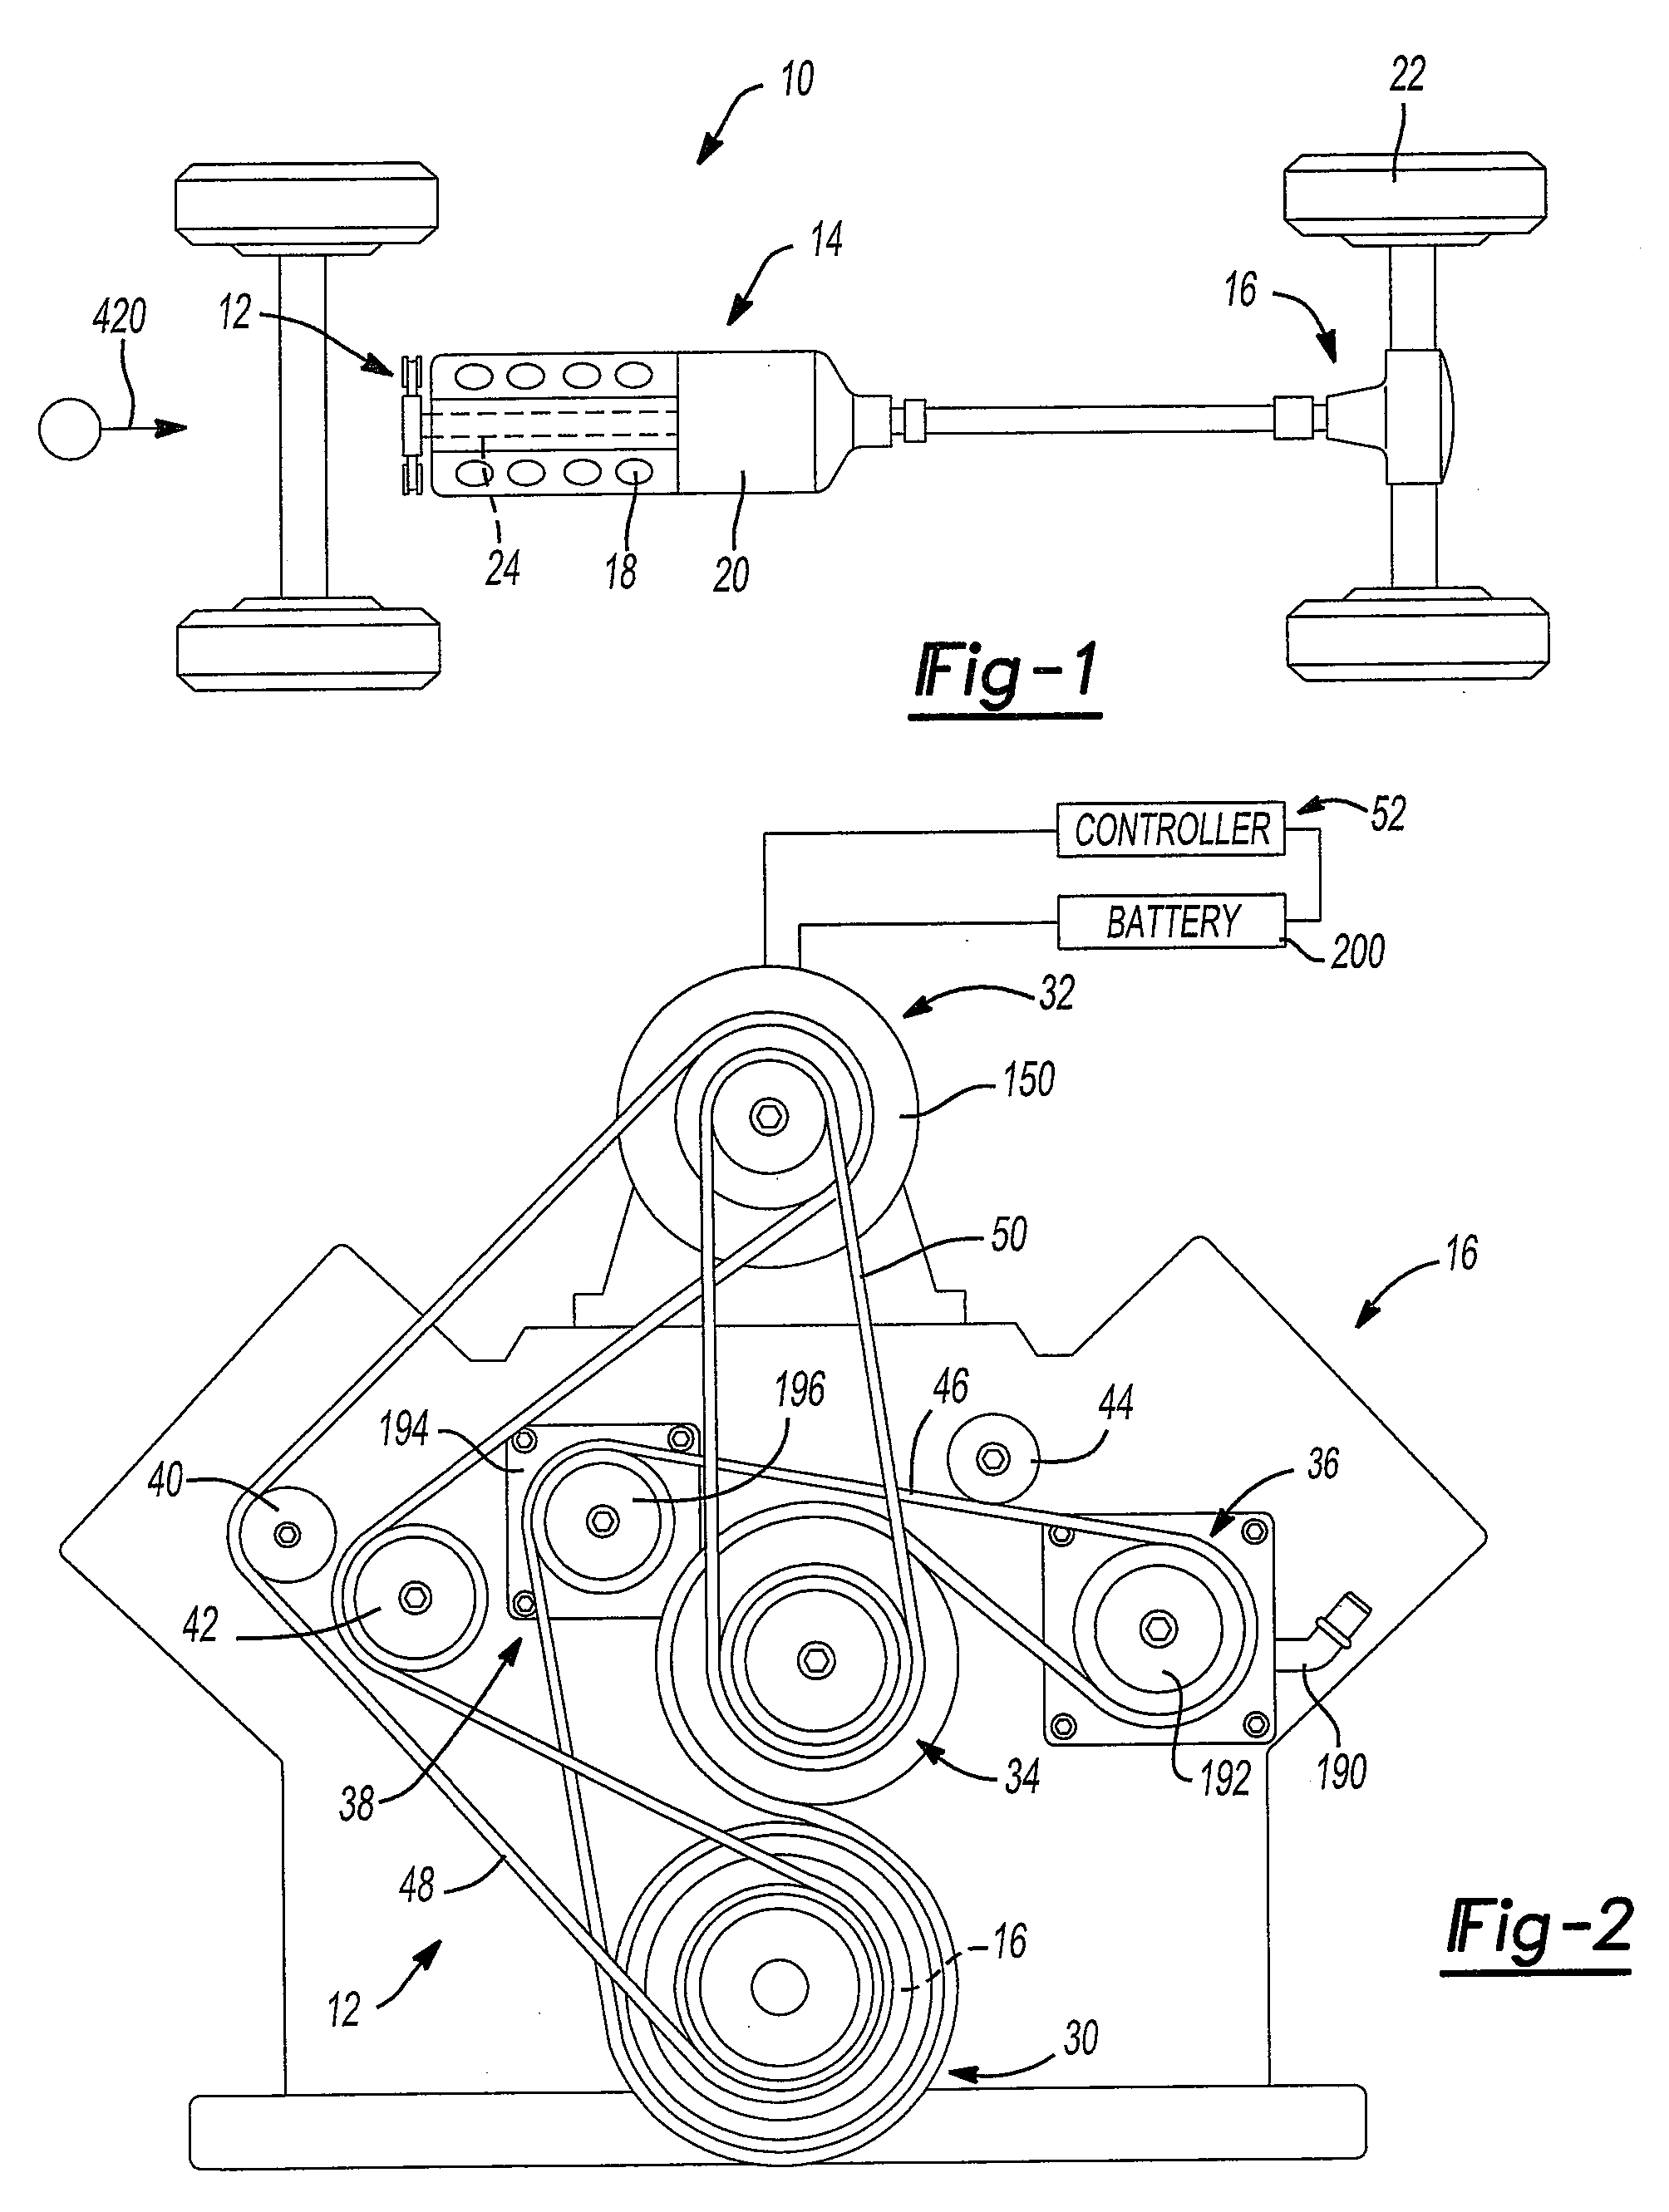 Engine powered device having accessory drive and reversing motor for selectively starting engine and powering accessory drive